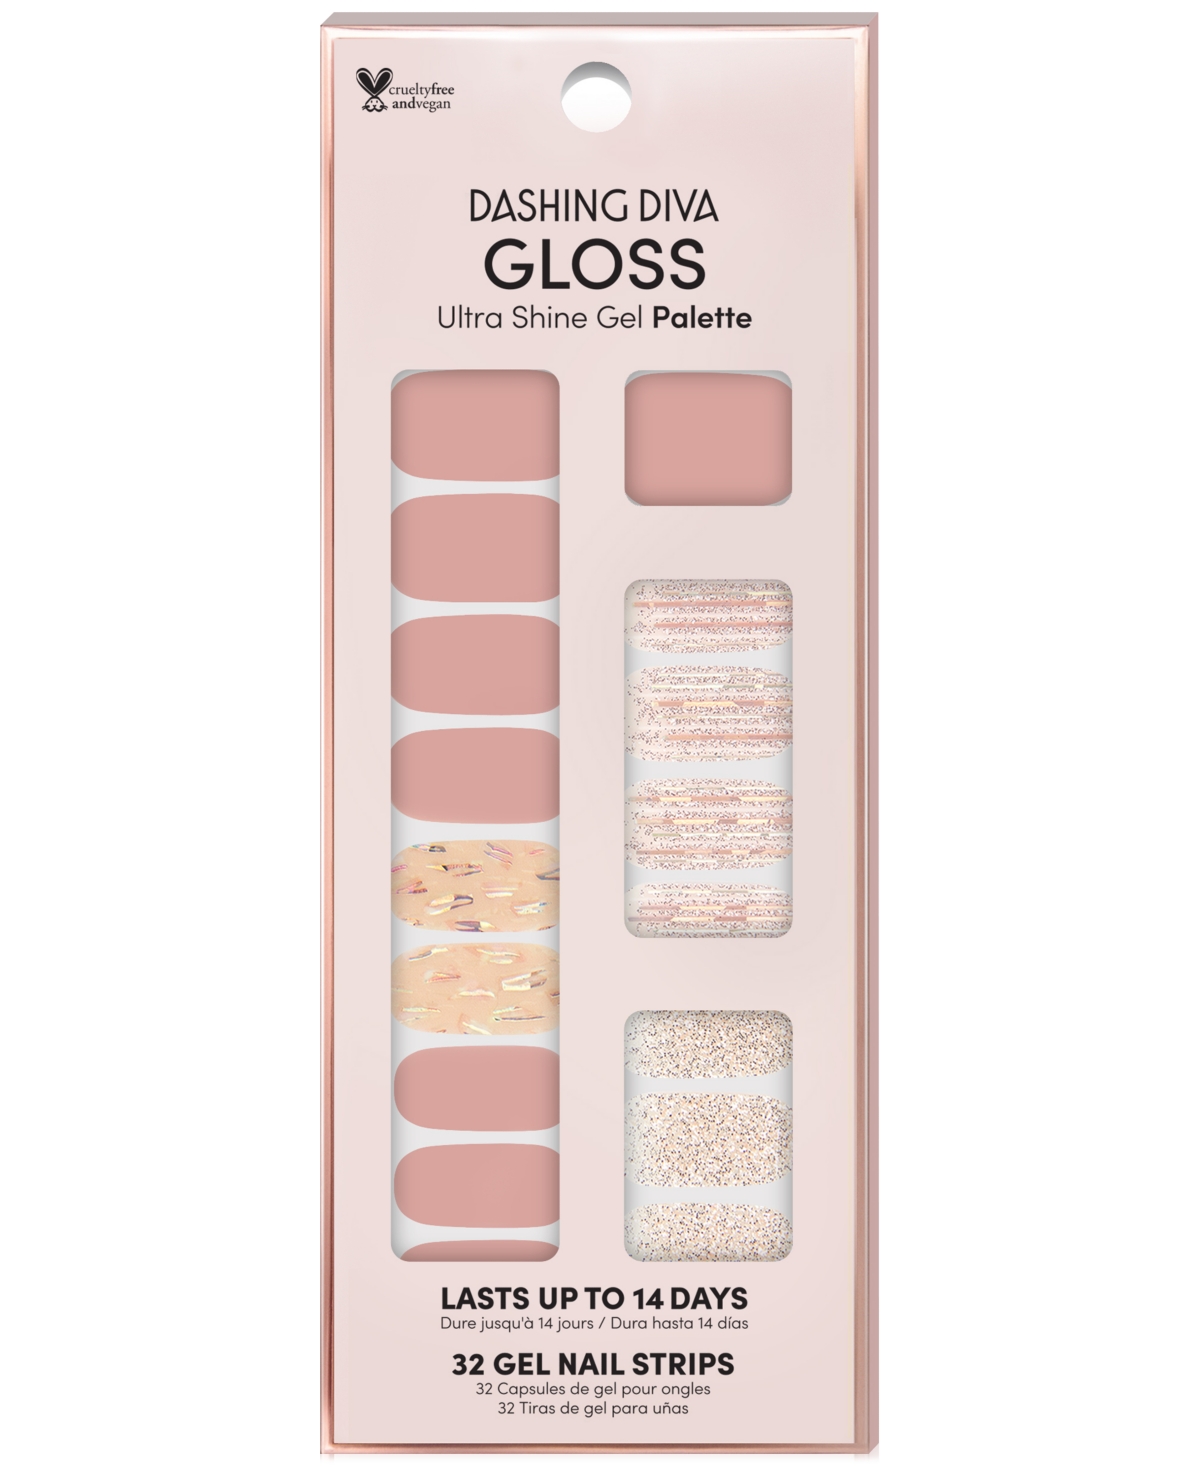 Gloss Ultra Shine Gel Palette - After Glow - After Glow